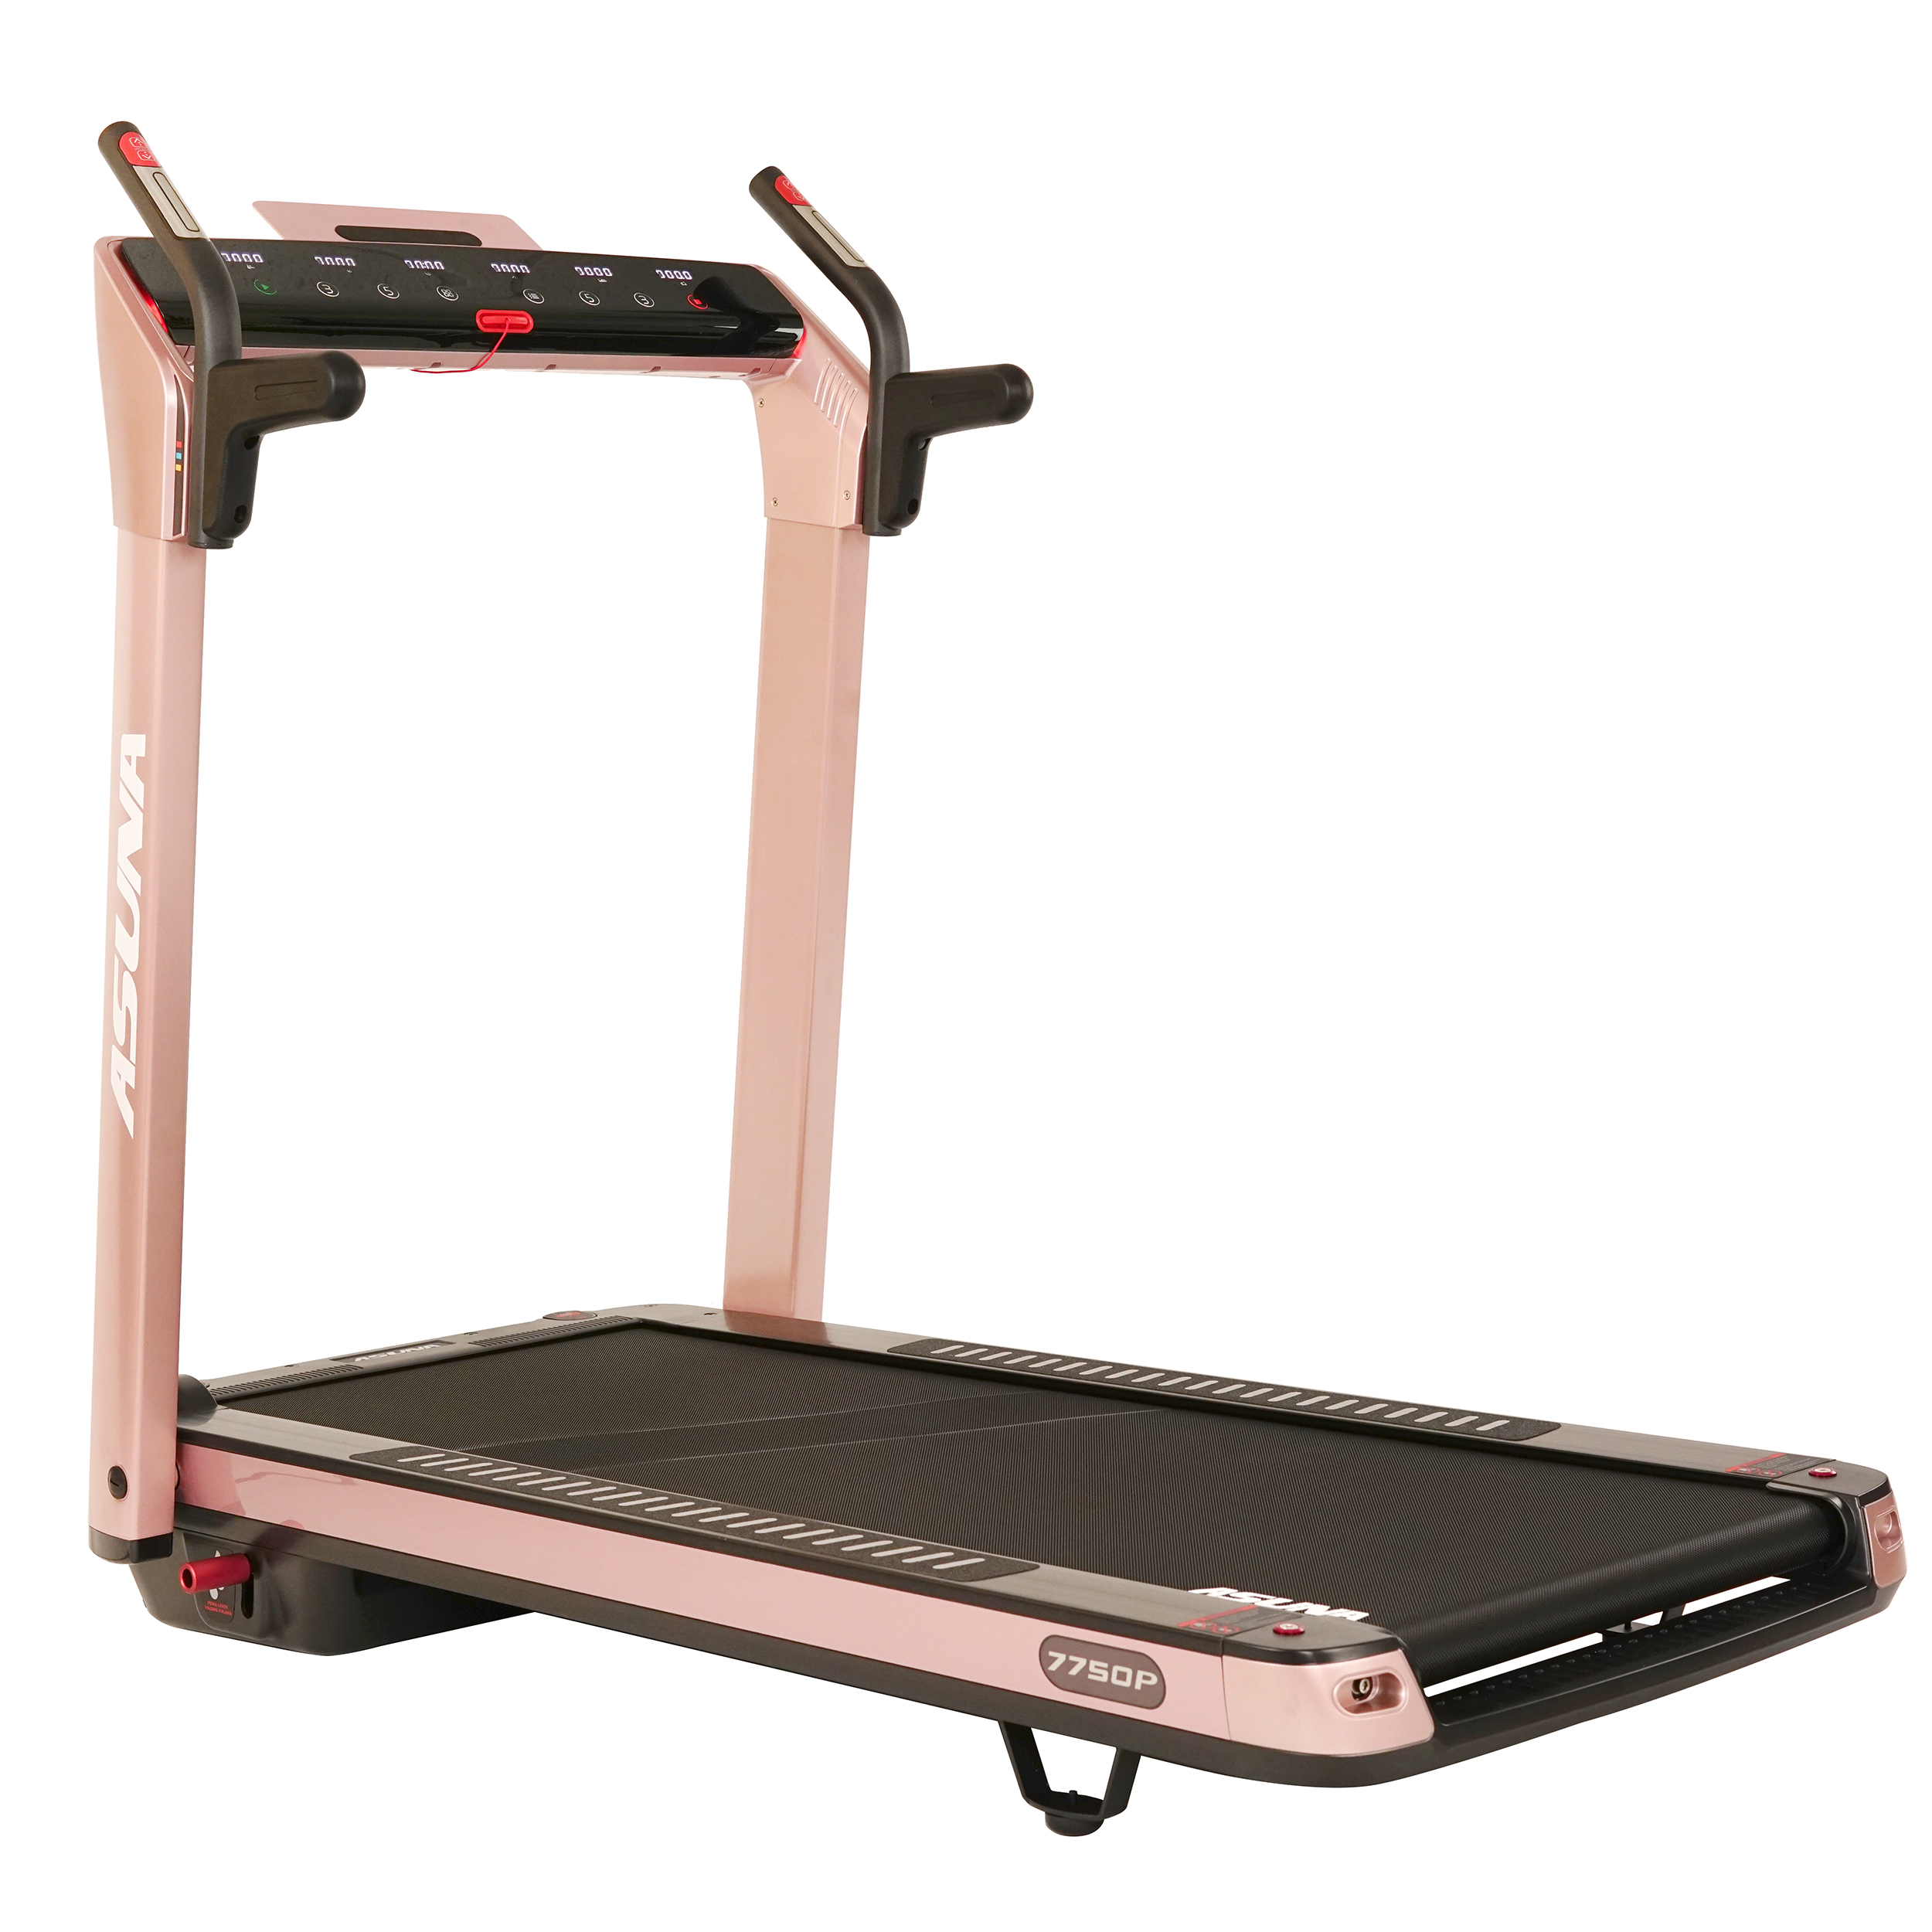 ASUNA SpaceFlex Motorized Treadmill with Auto Incline, Wide Folding Belt - 7750Pink - image 9 of 9